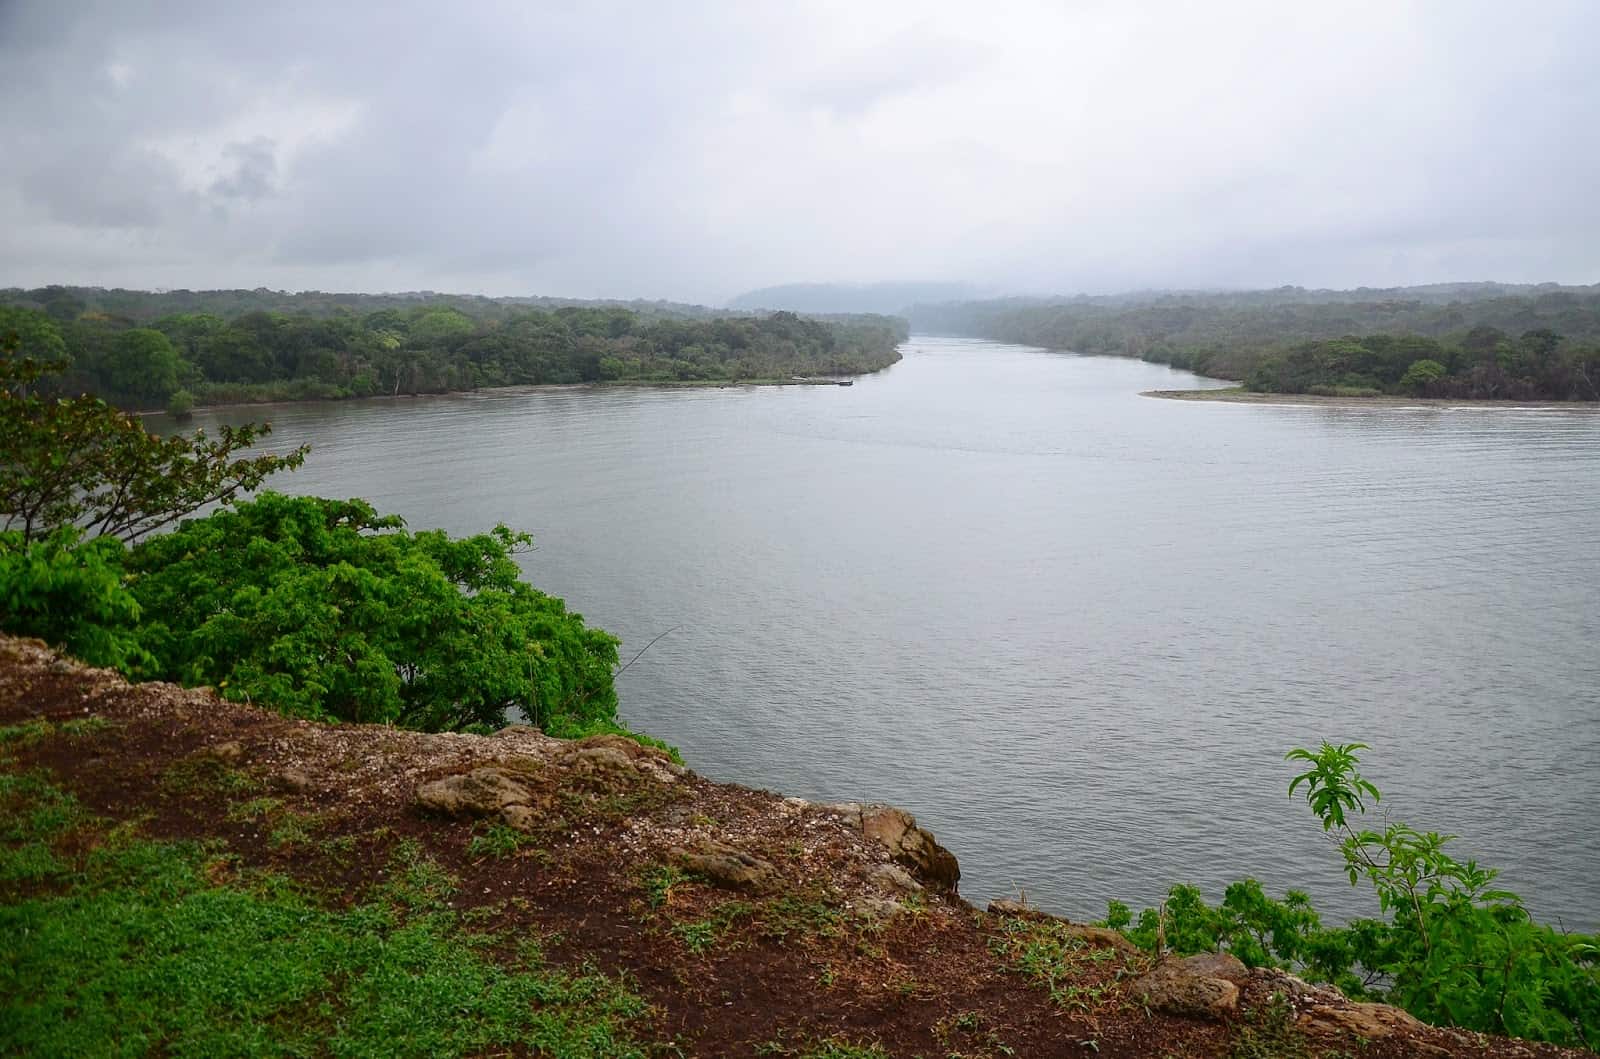 Río Chagres from Fuerte San Lorenzo in Panama